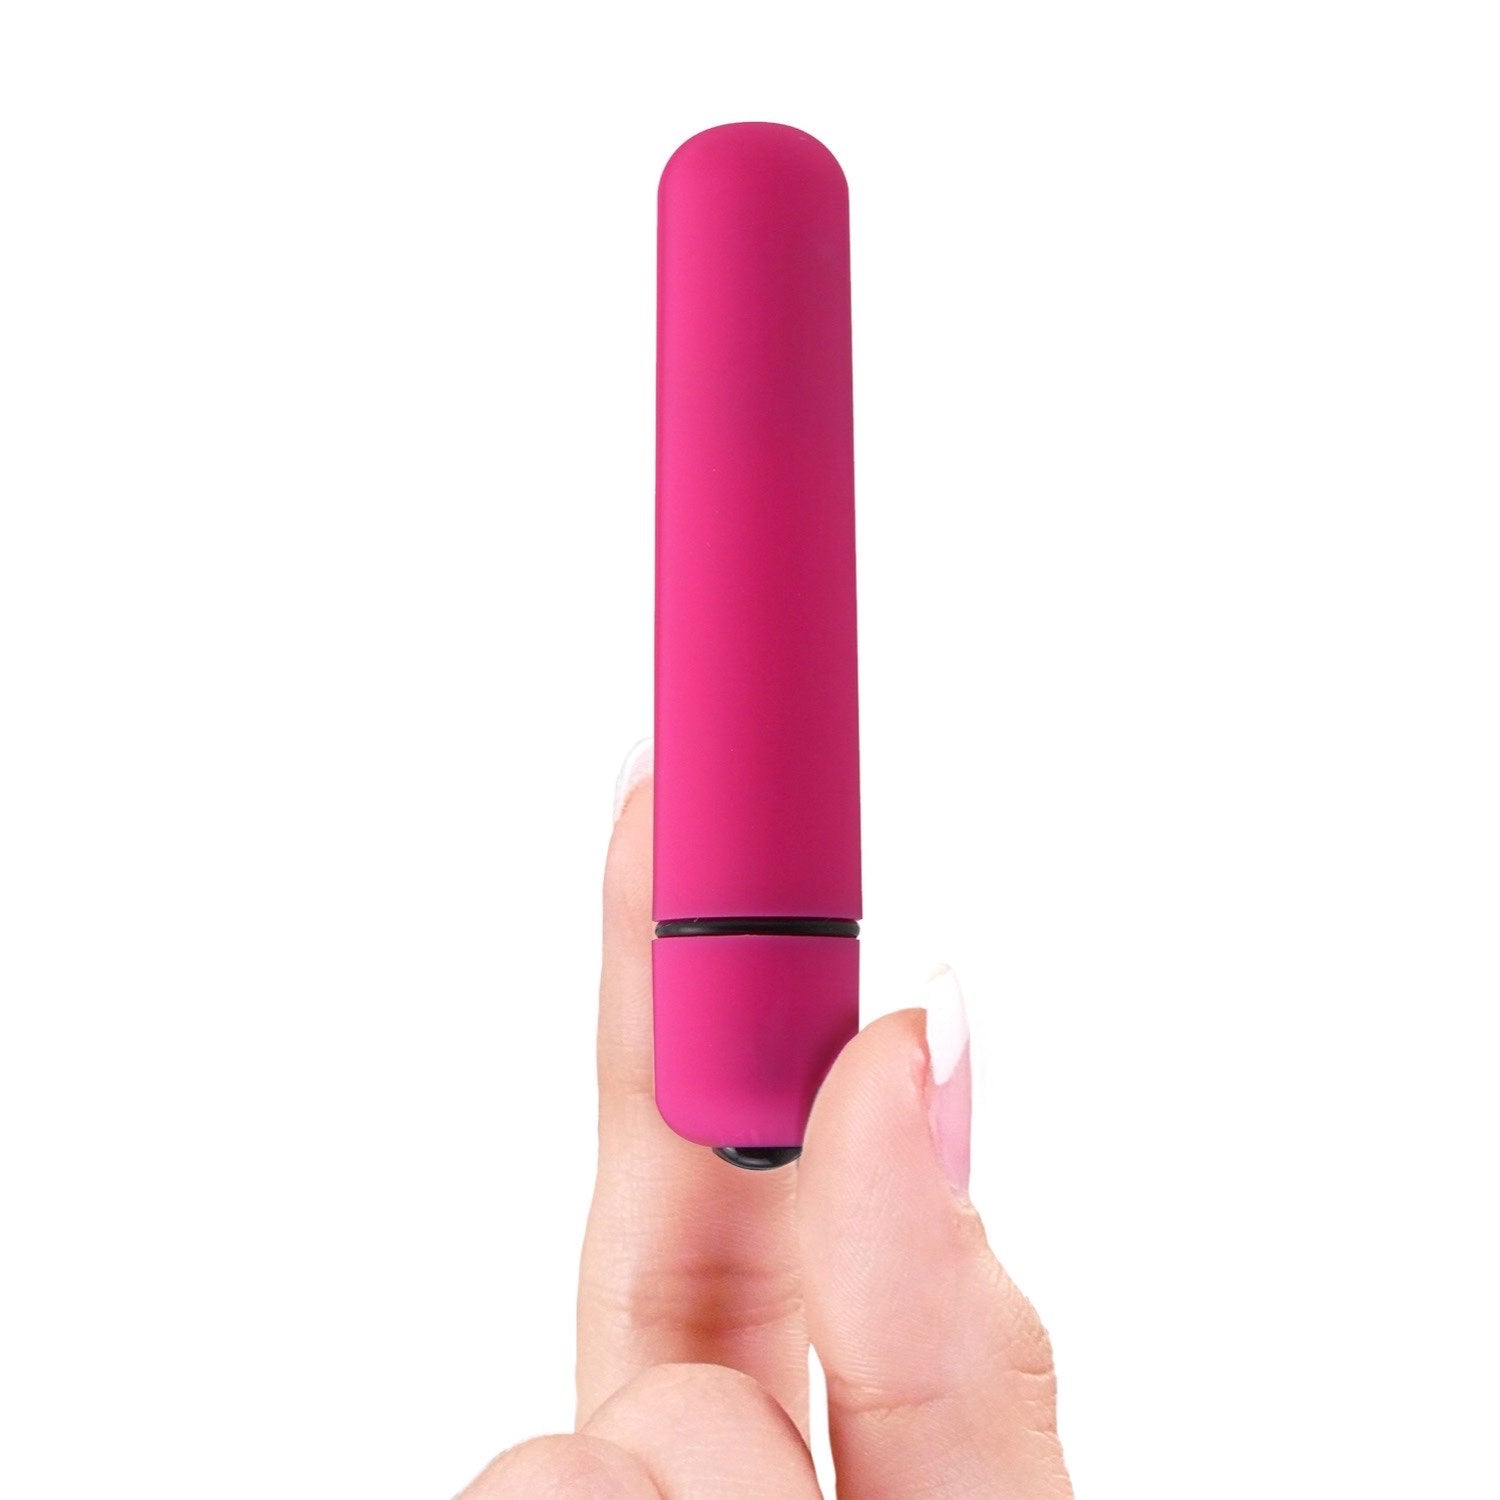 Luv Touch Neon Bullet XL - Pink 8.3 cm (3.25&quot;) Bullet by Pipedream